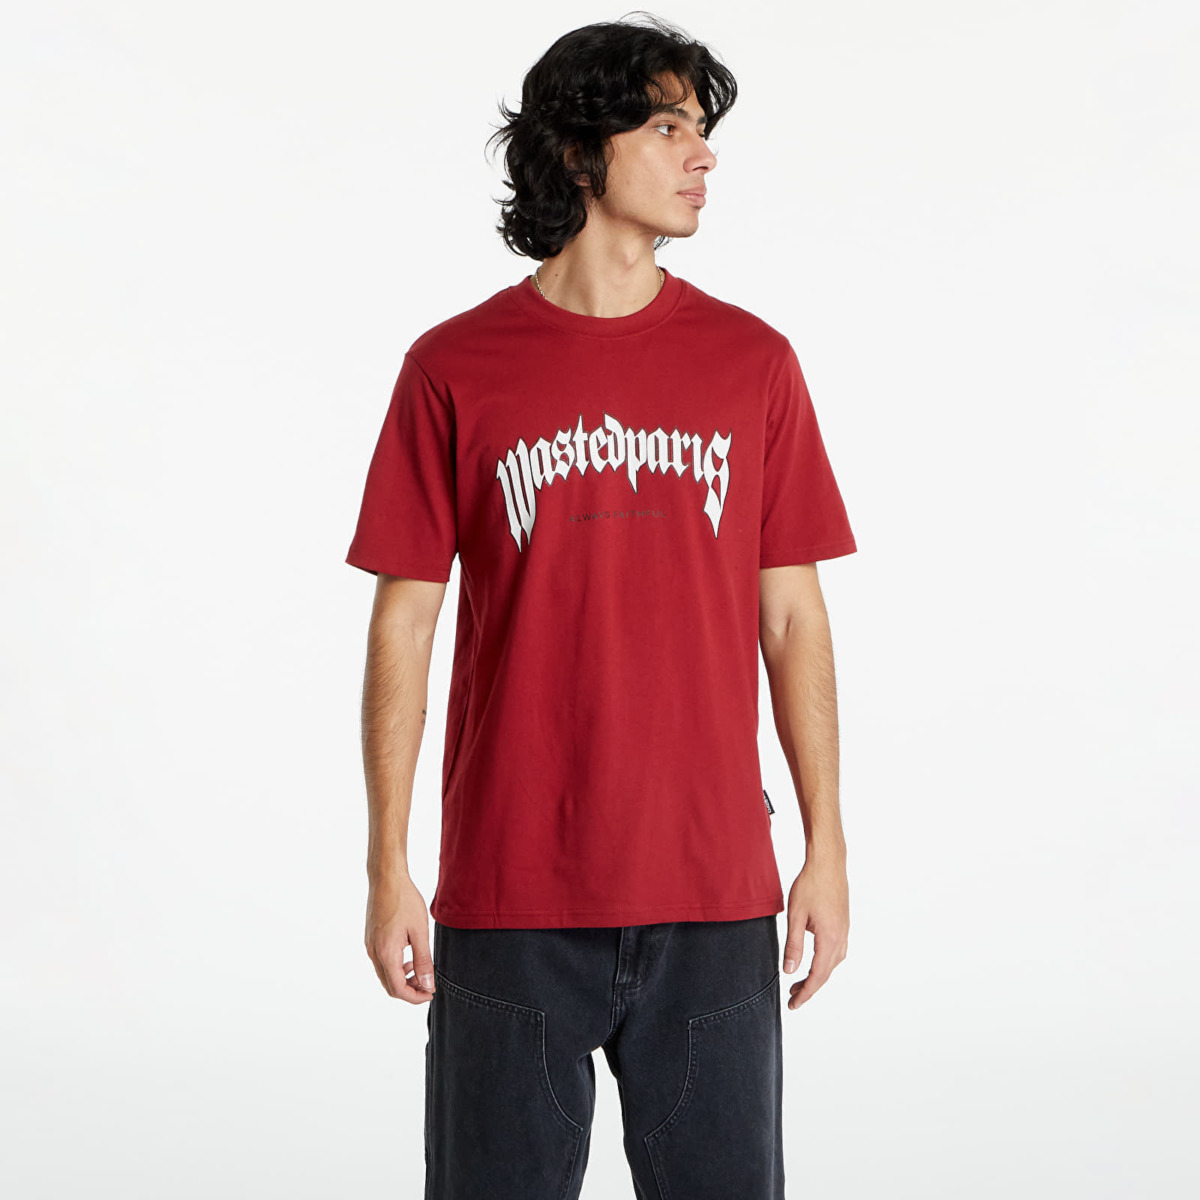 Wasted Paris - Top Red for Man from Footshop GOOFASH